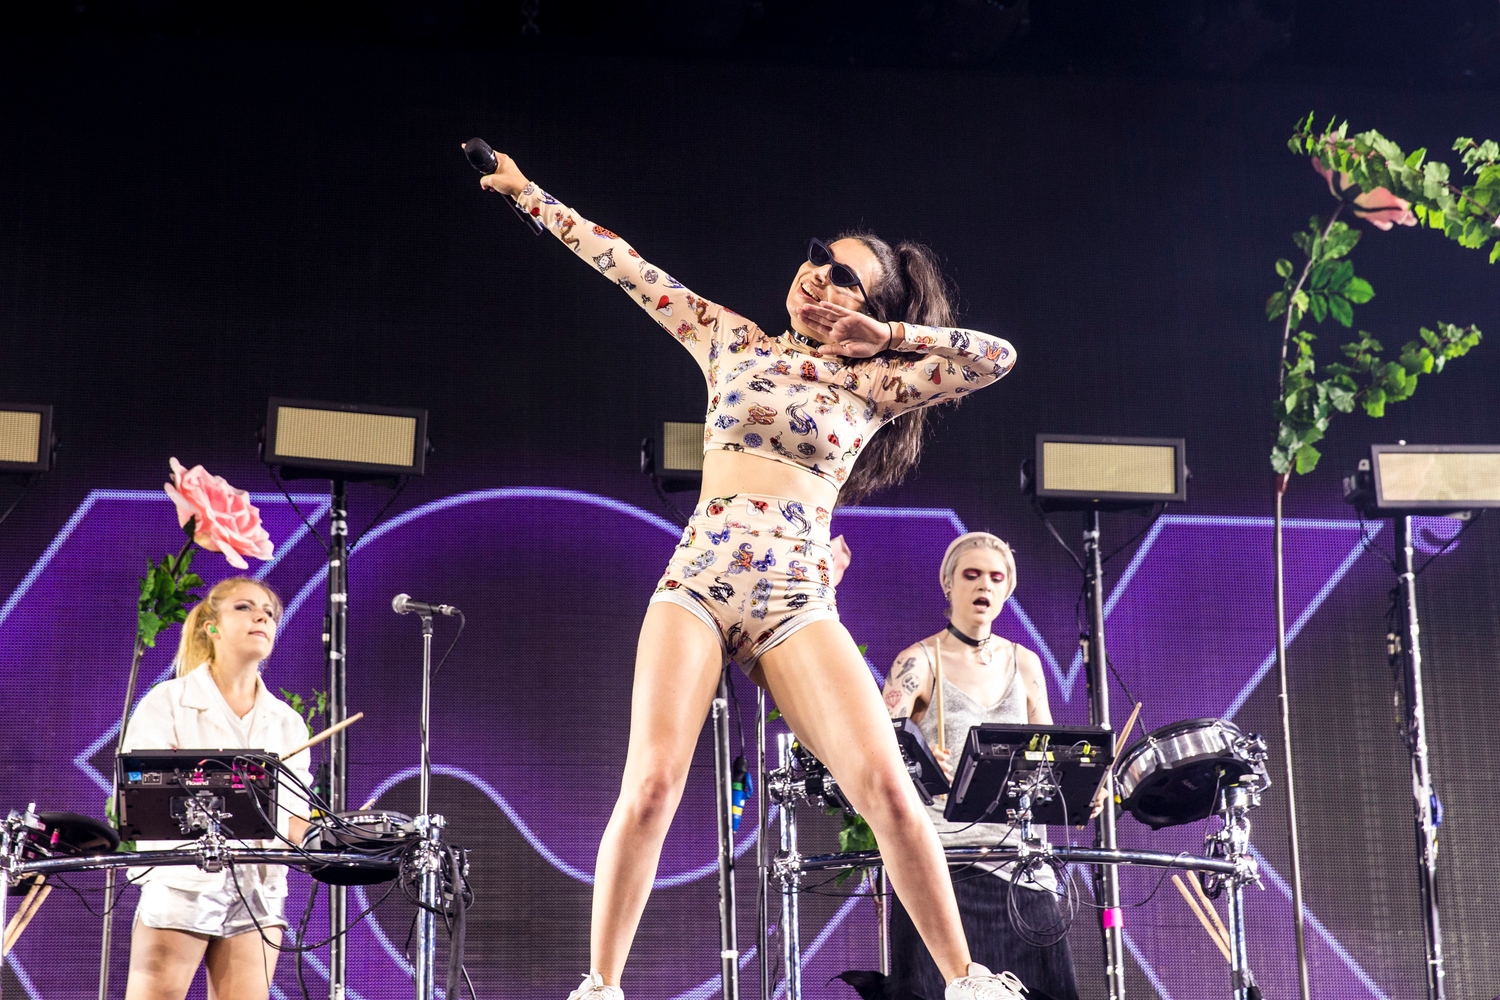 Charli XCX, Bonobo and Frank Carter bring firepower to day three at Rock Werchter 2017